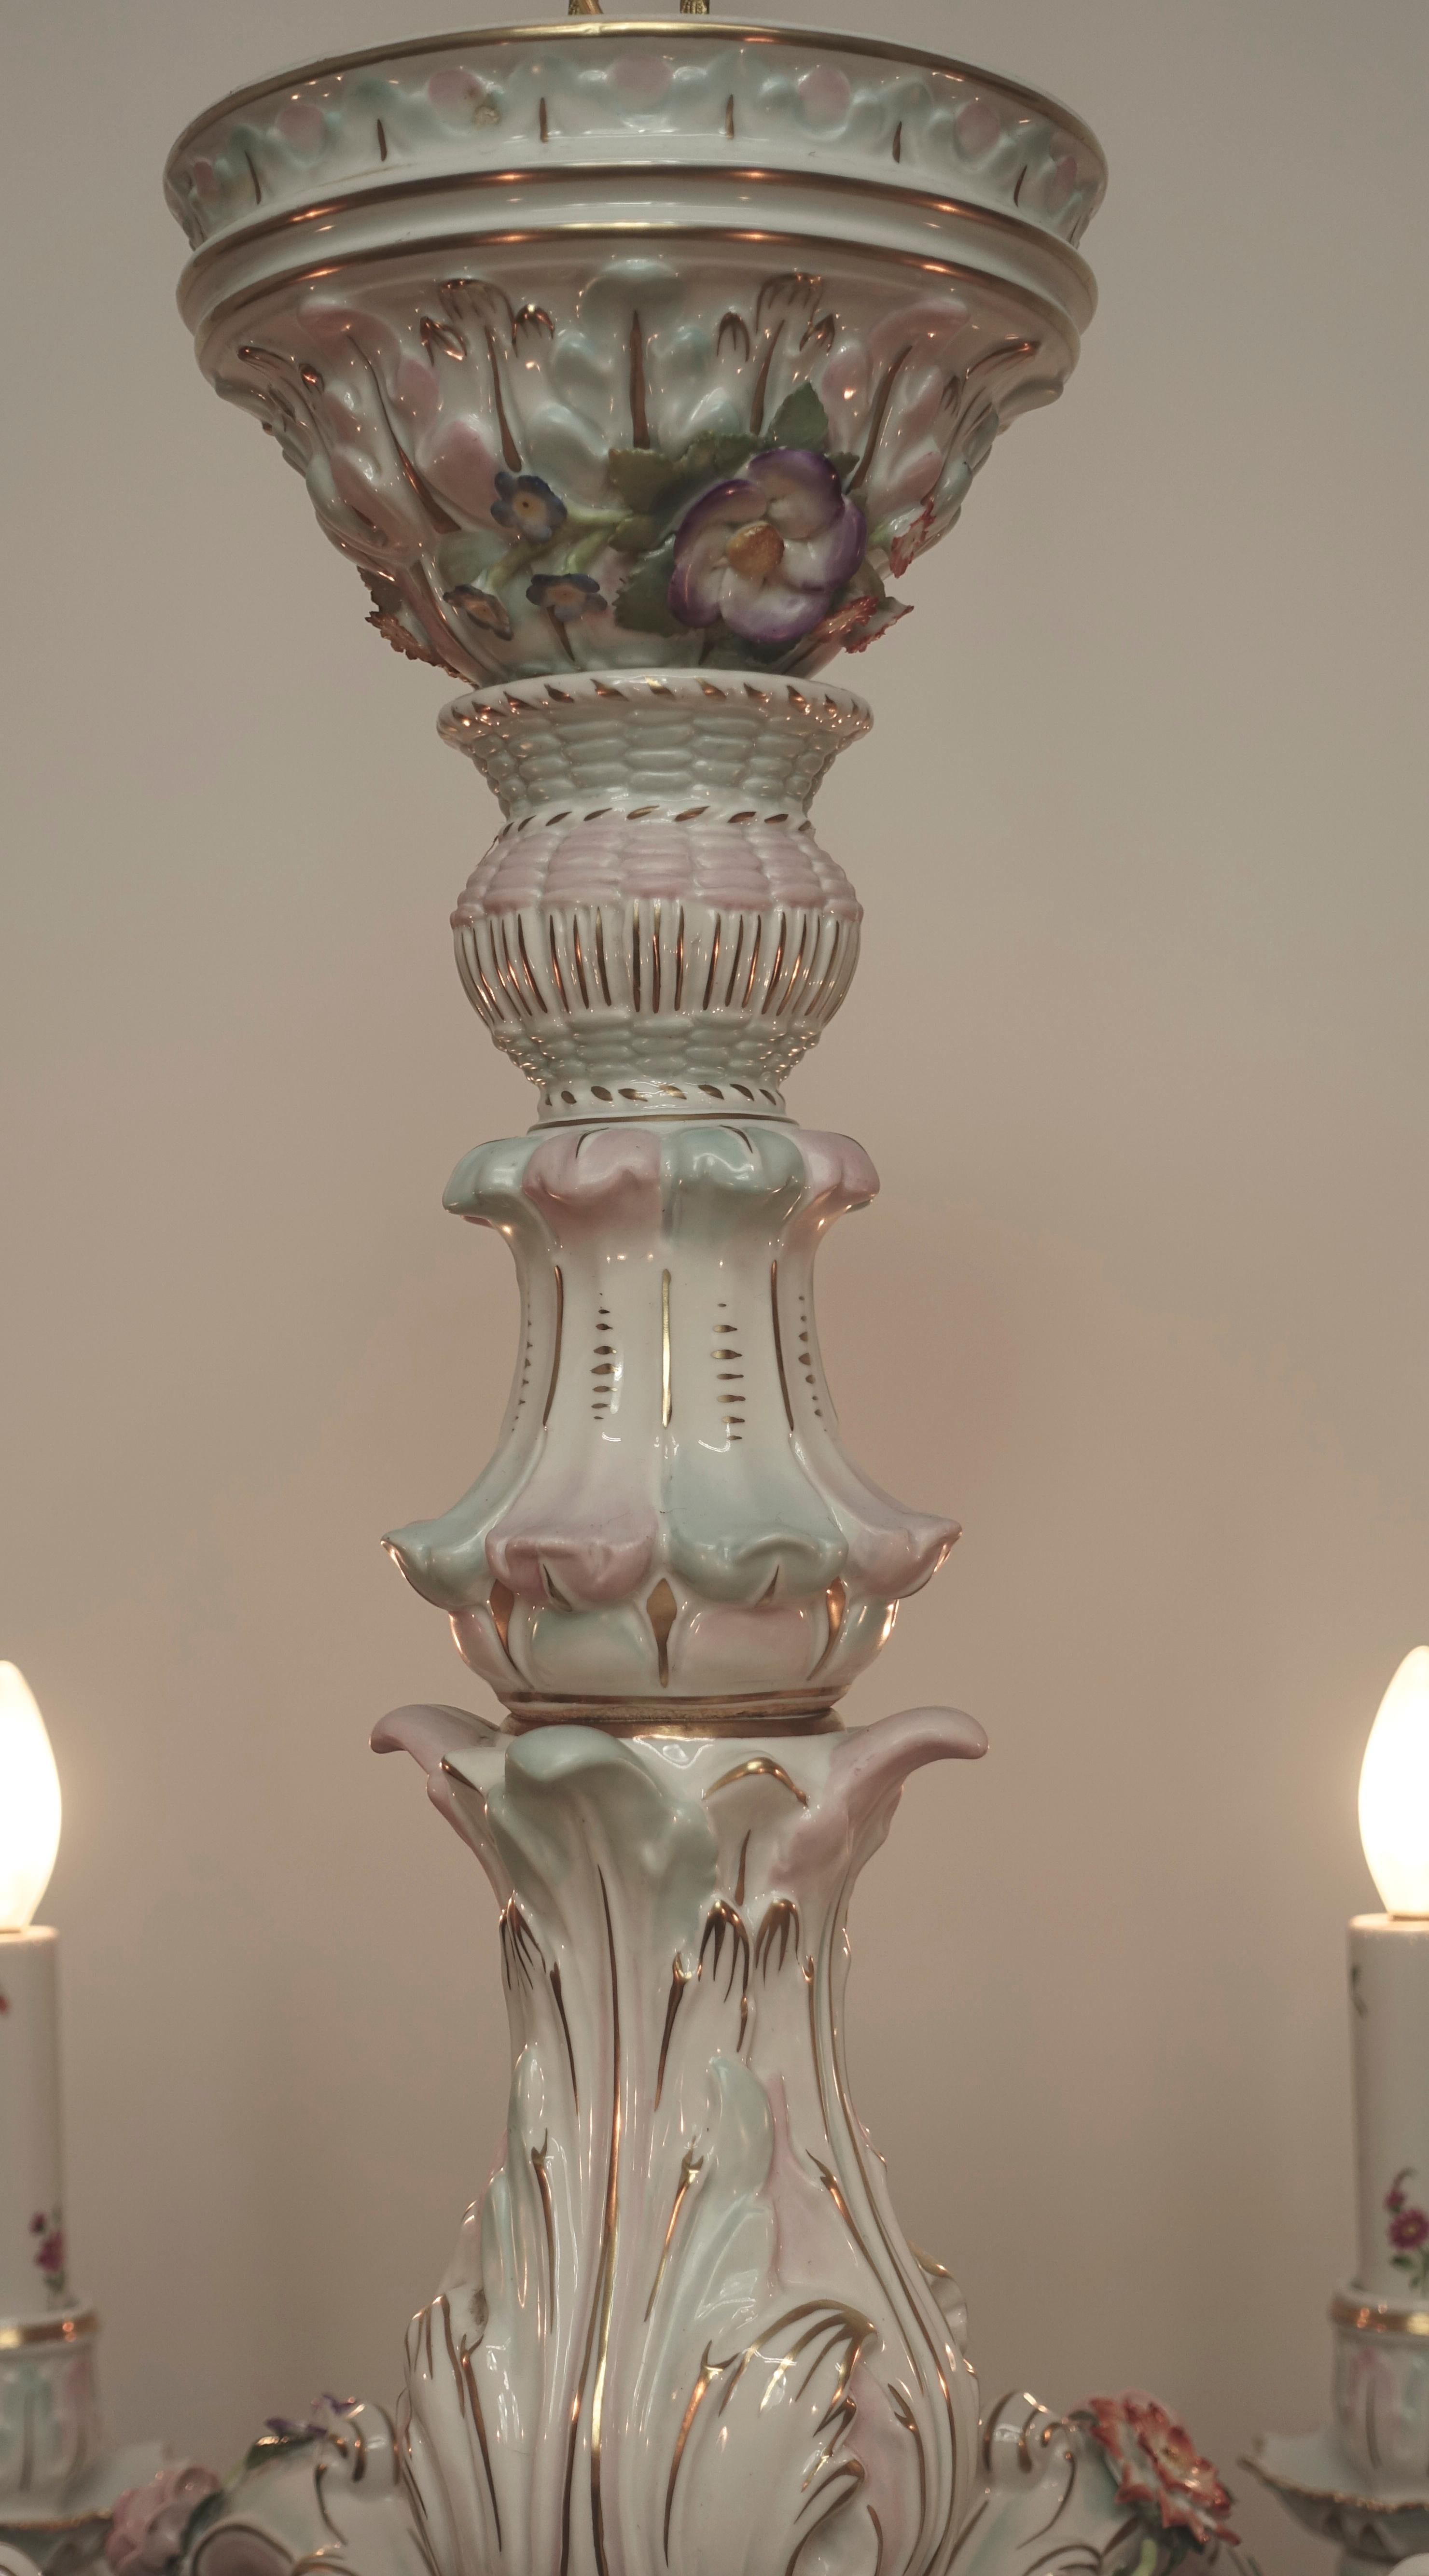 Von Schierholz Handmalerei painted and highly decorated floral pattern porcelain six-light chandelier with 22